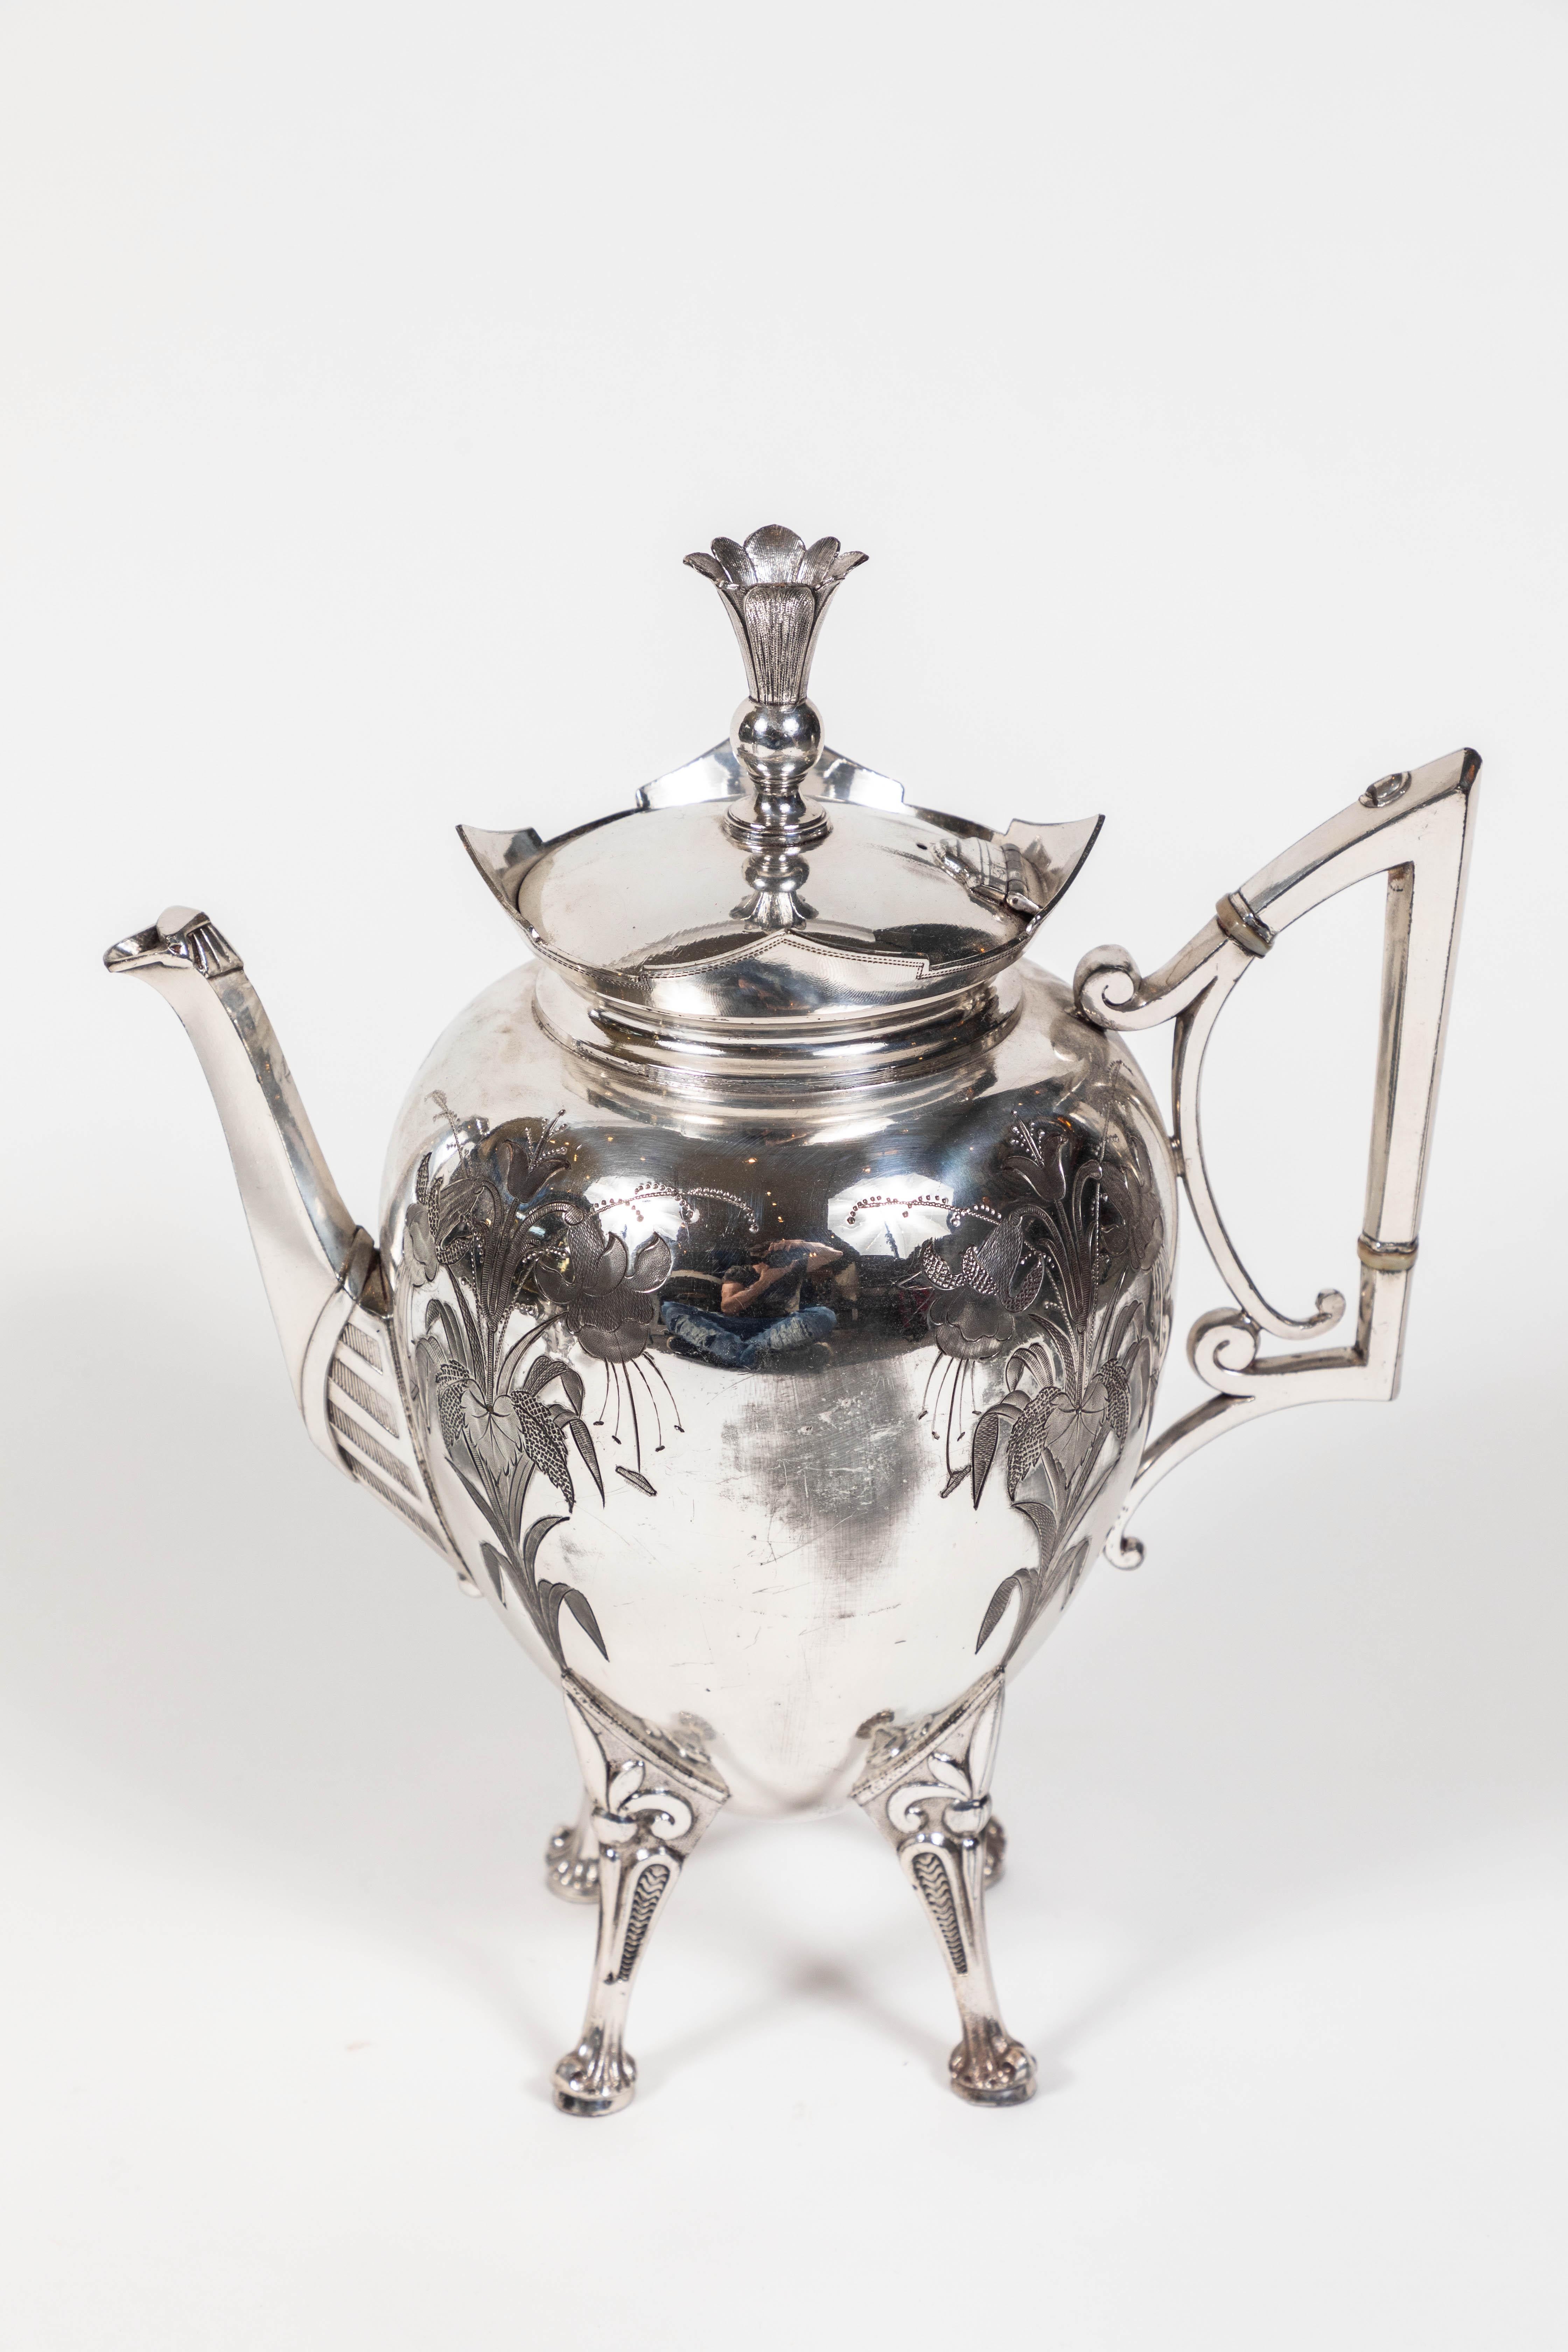 Meriden Britannia company Victorian silver plate coffee set with coffee pot cream, sugar, and matching jar with lid.

Measures: Coffee: 6.5 x 9.5 x 11.5
Jar with Lid: 7 x 6 x 8.5
Cream: 6x 2.5 x 6.5
Sugar: 6 x 3.5 x 5

The Meriden Britannia